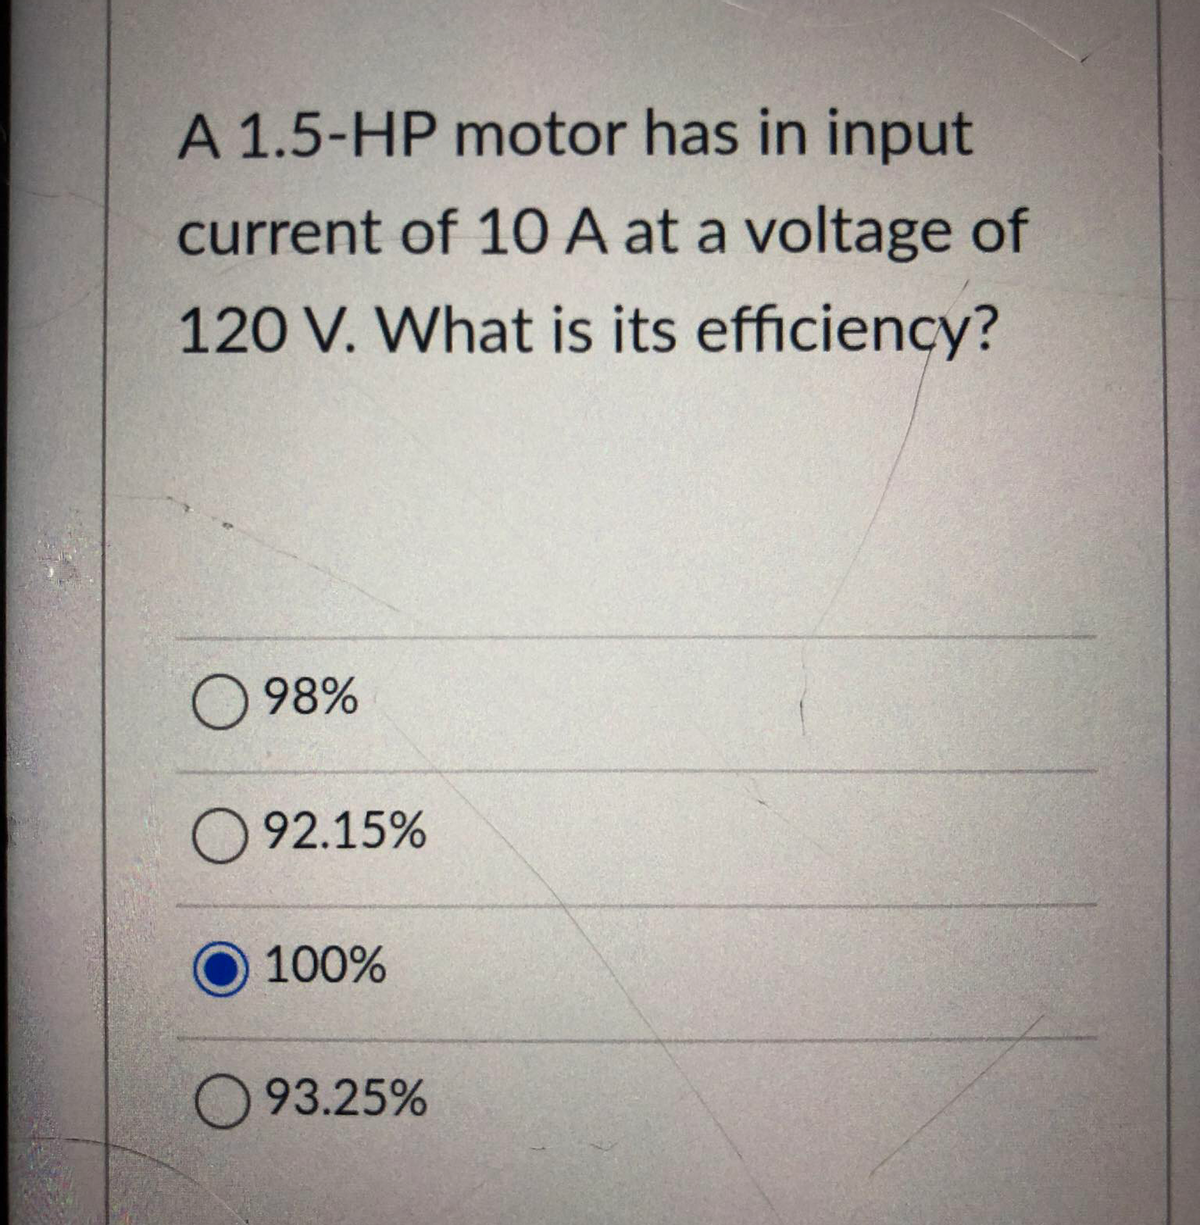 A 1.5-HP motor has in input
current of 10 A at a voltage of
120 V. What is its efficiency?
98%
92.15%
100%
93.25%